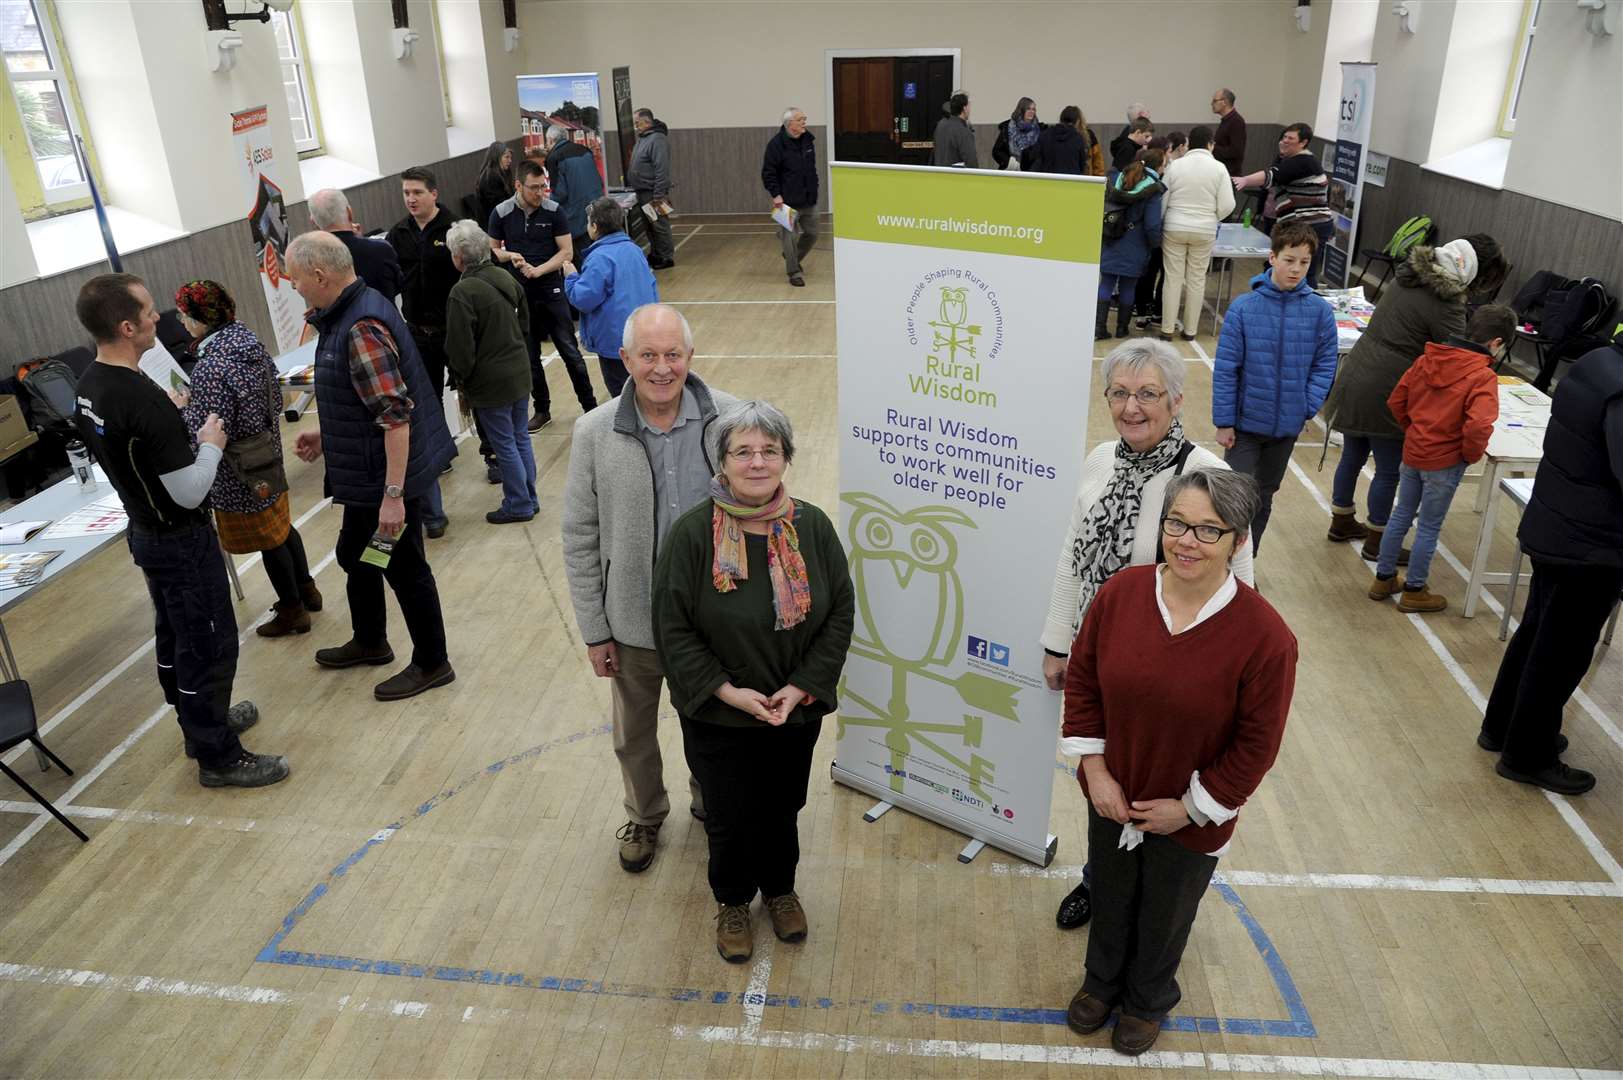 Energy information day at Burghead Community Hall. From left, Burghead and Cummingston community councillor Jim Patterson, Joan Megson, Liz McKnockiter, and Fi Thomson, of Rural Wisdom. Picture: Eric Cormack.